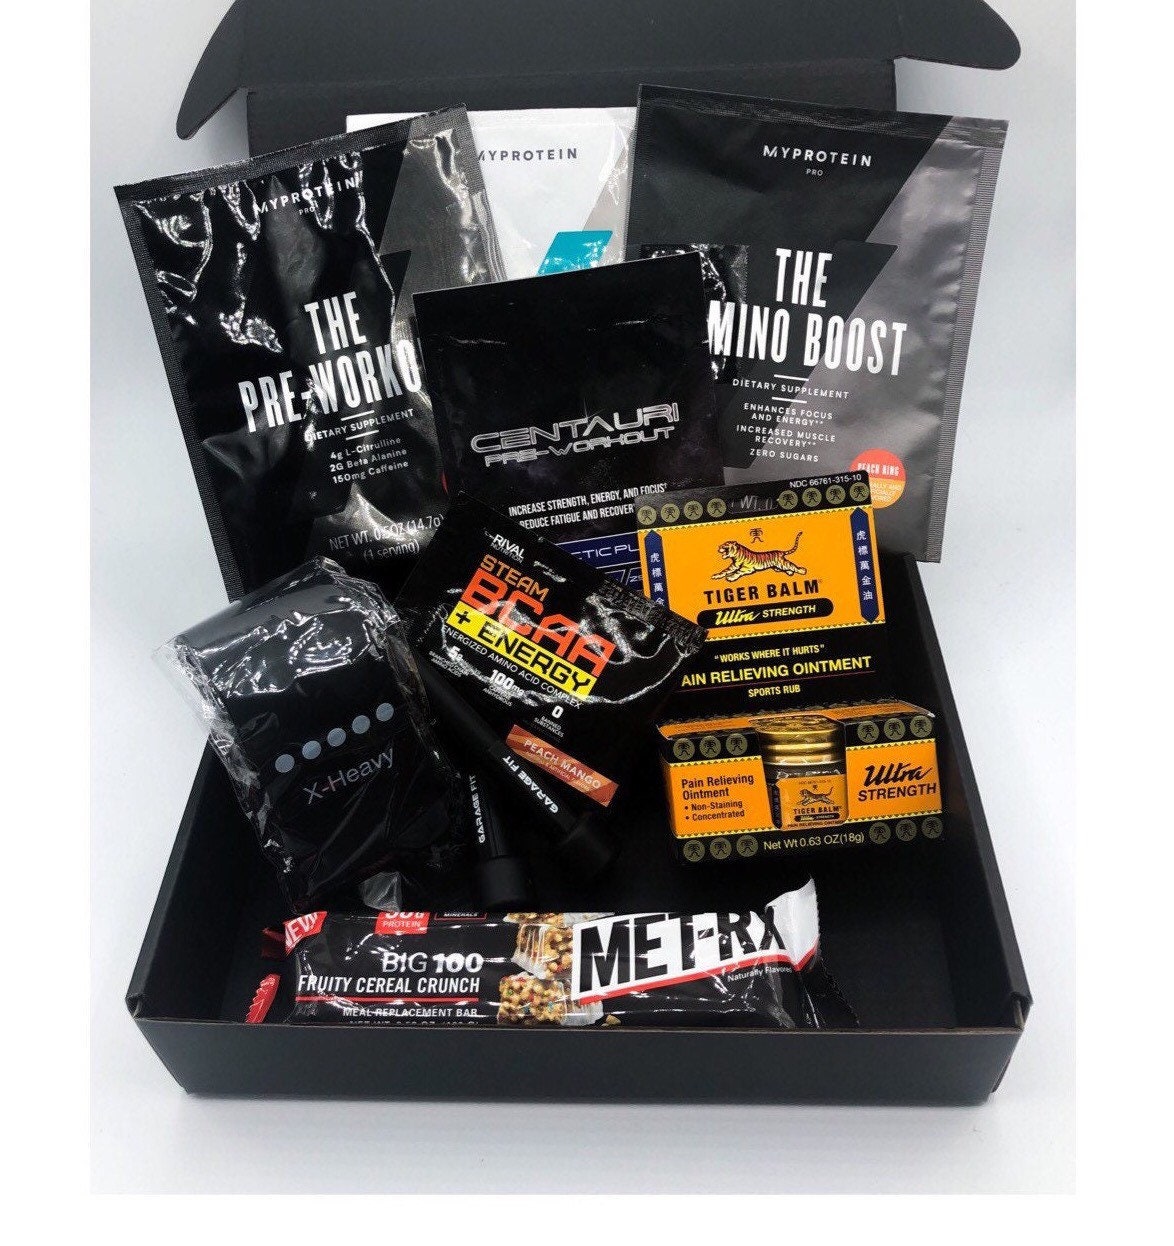 Gym-themed care package! #gym #fitness #gift #carepackage #gymrat